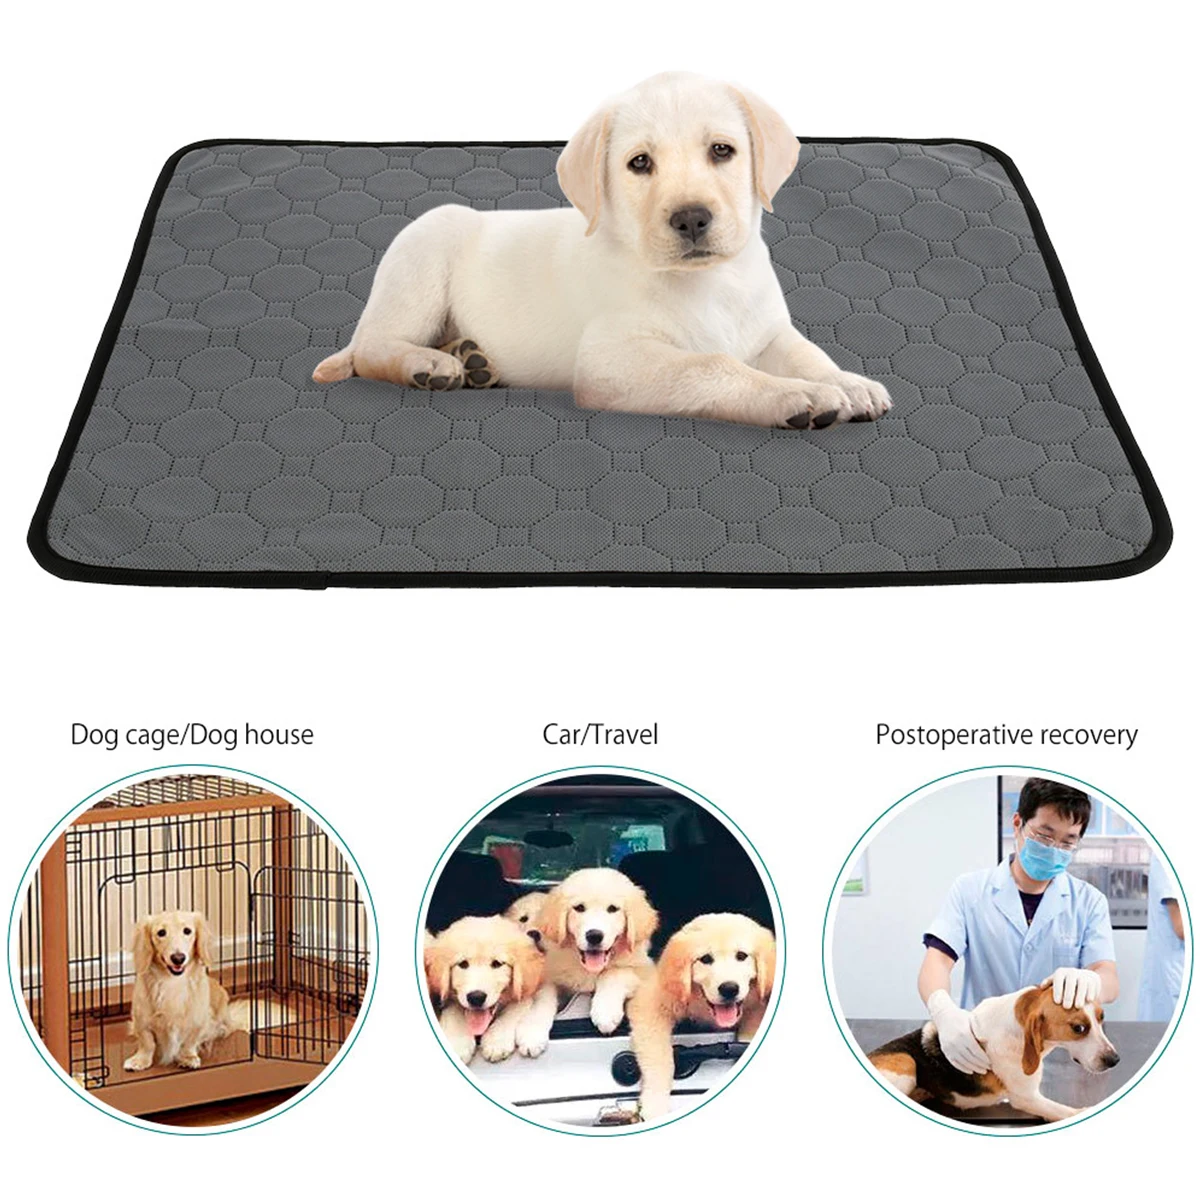 https://ae01.alicdn.com/kf/S361969203860483f8243381f06bd0a48U/Washable-Dog-Pee-Pads-Reusable-Puppy-Training-Pad-Non-Slip-Absorption-Mats-Bed-Blankets-Cats-Dogs.jpg